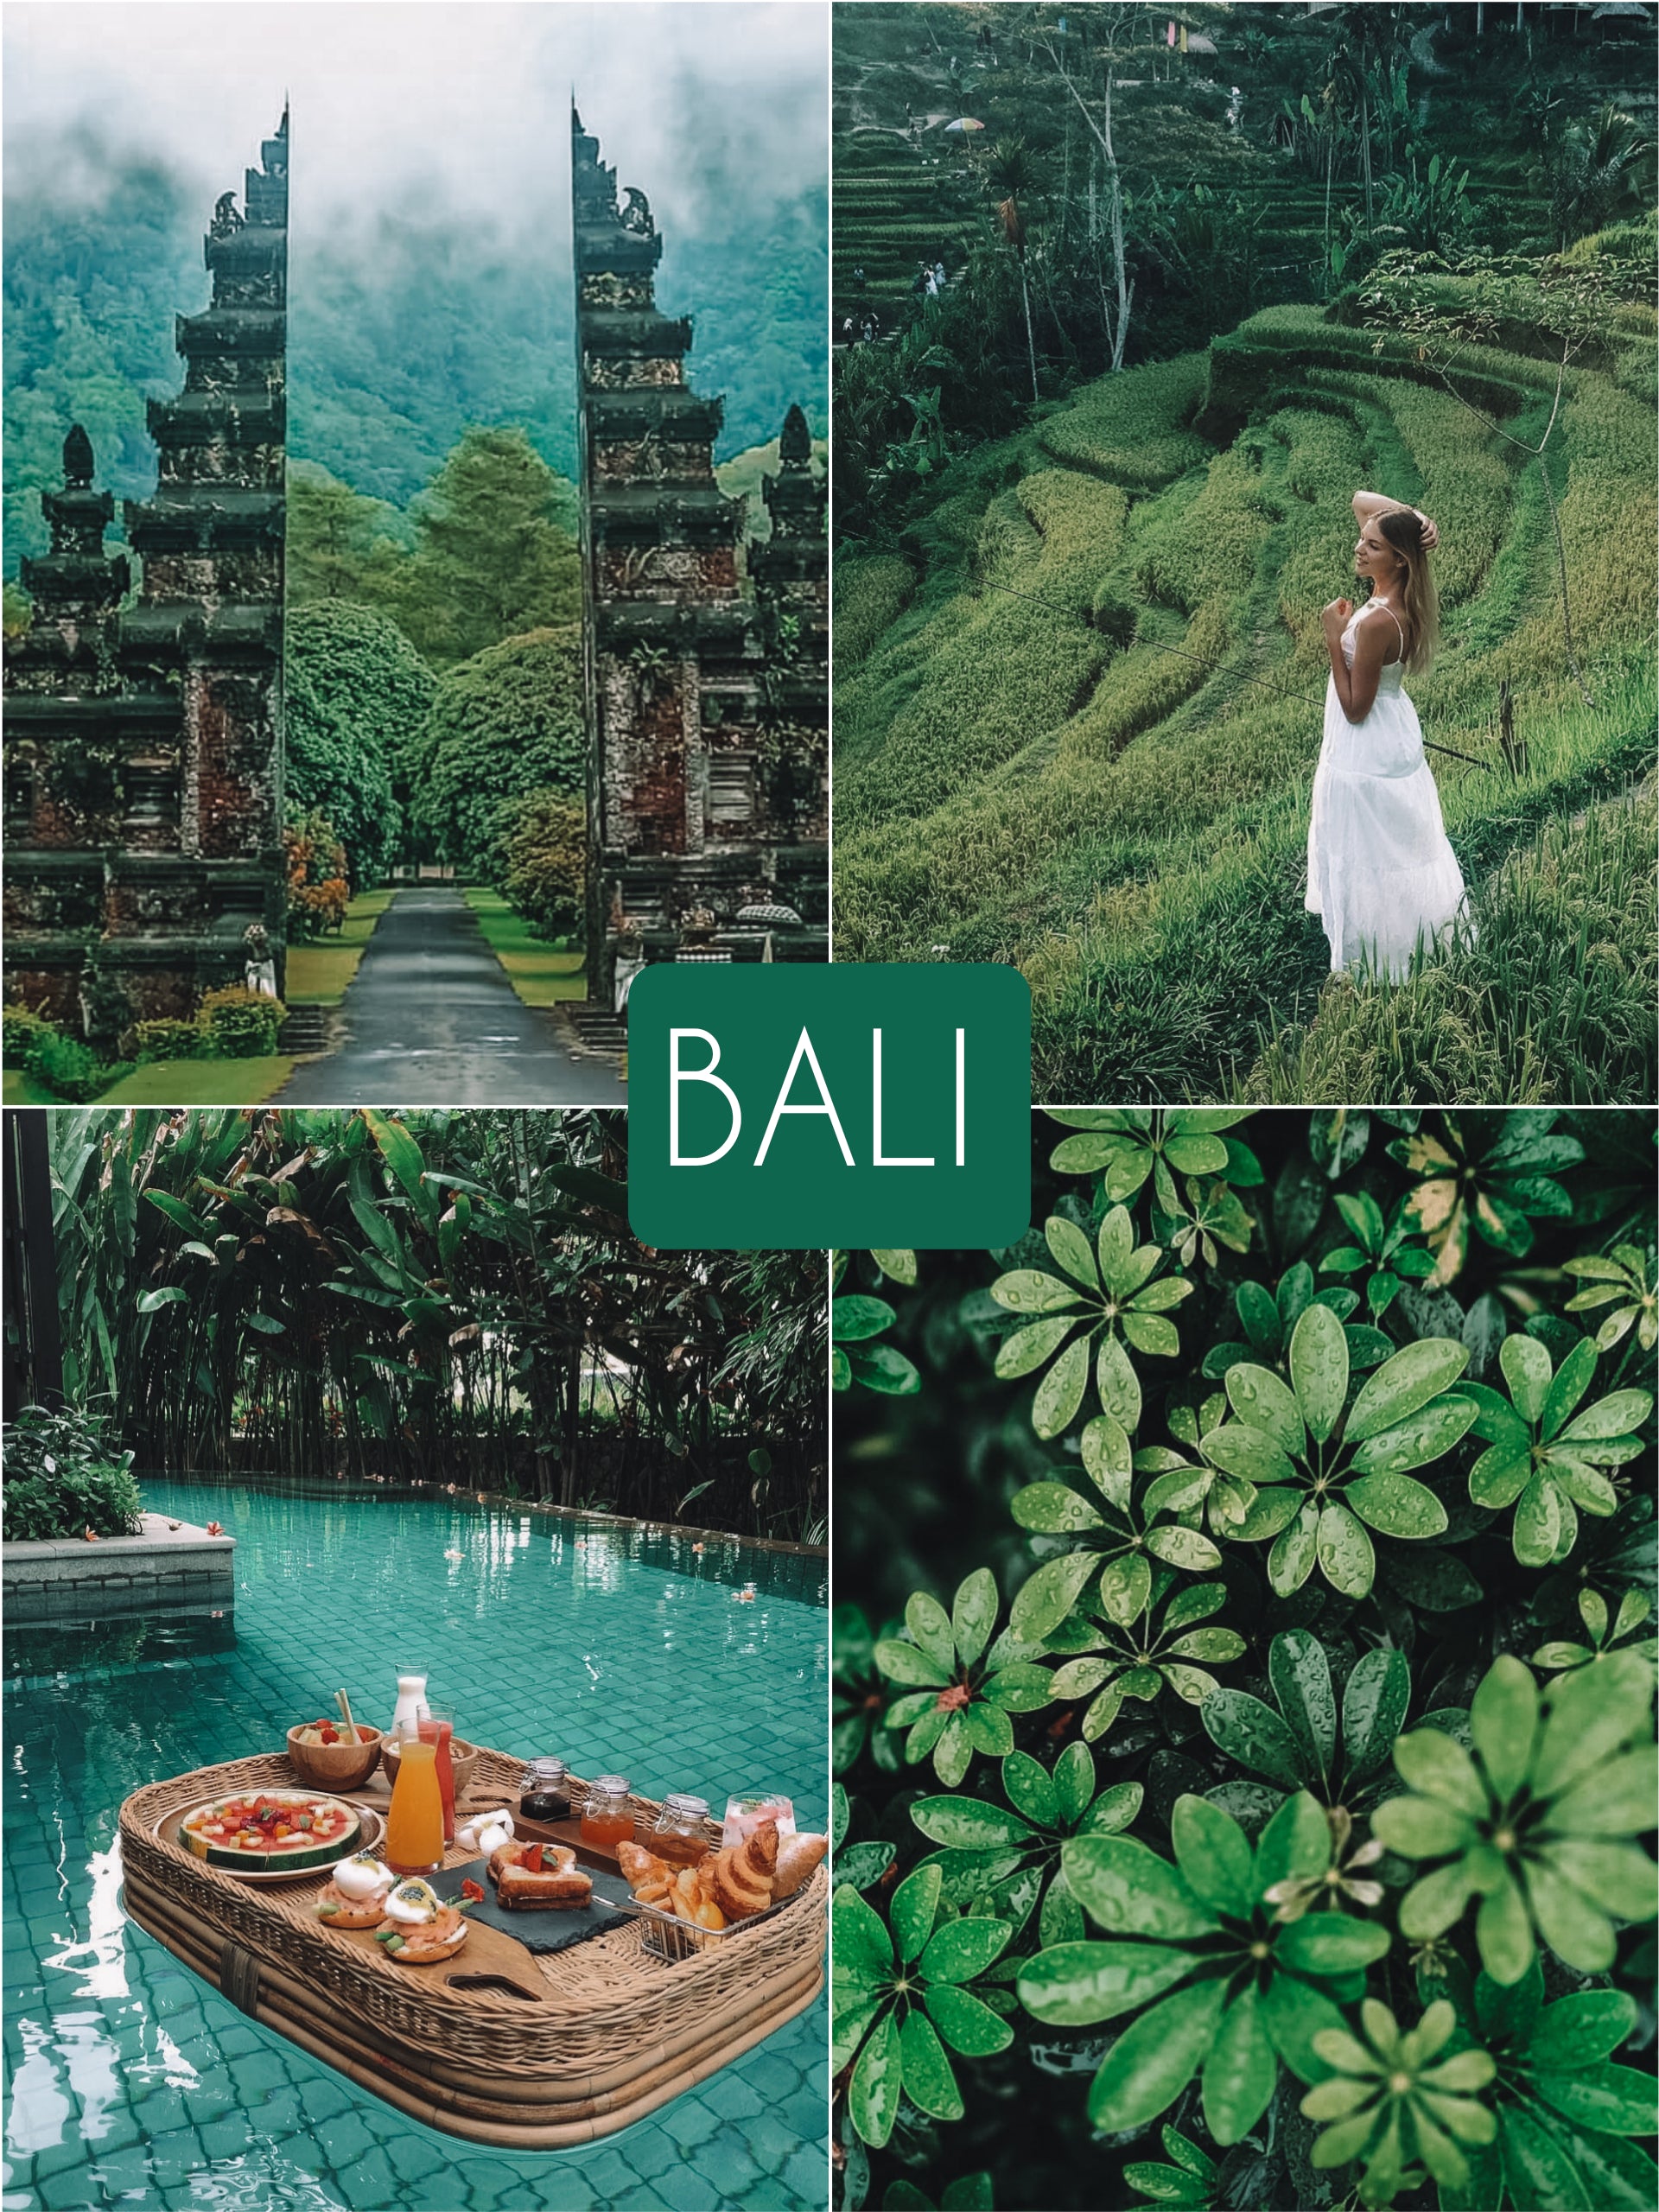 Bali - One Click Filter